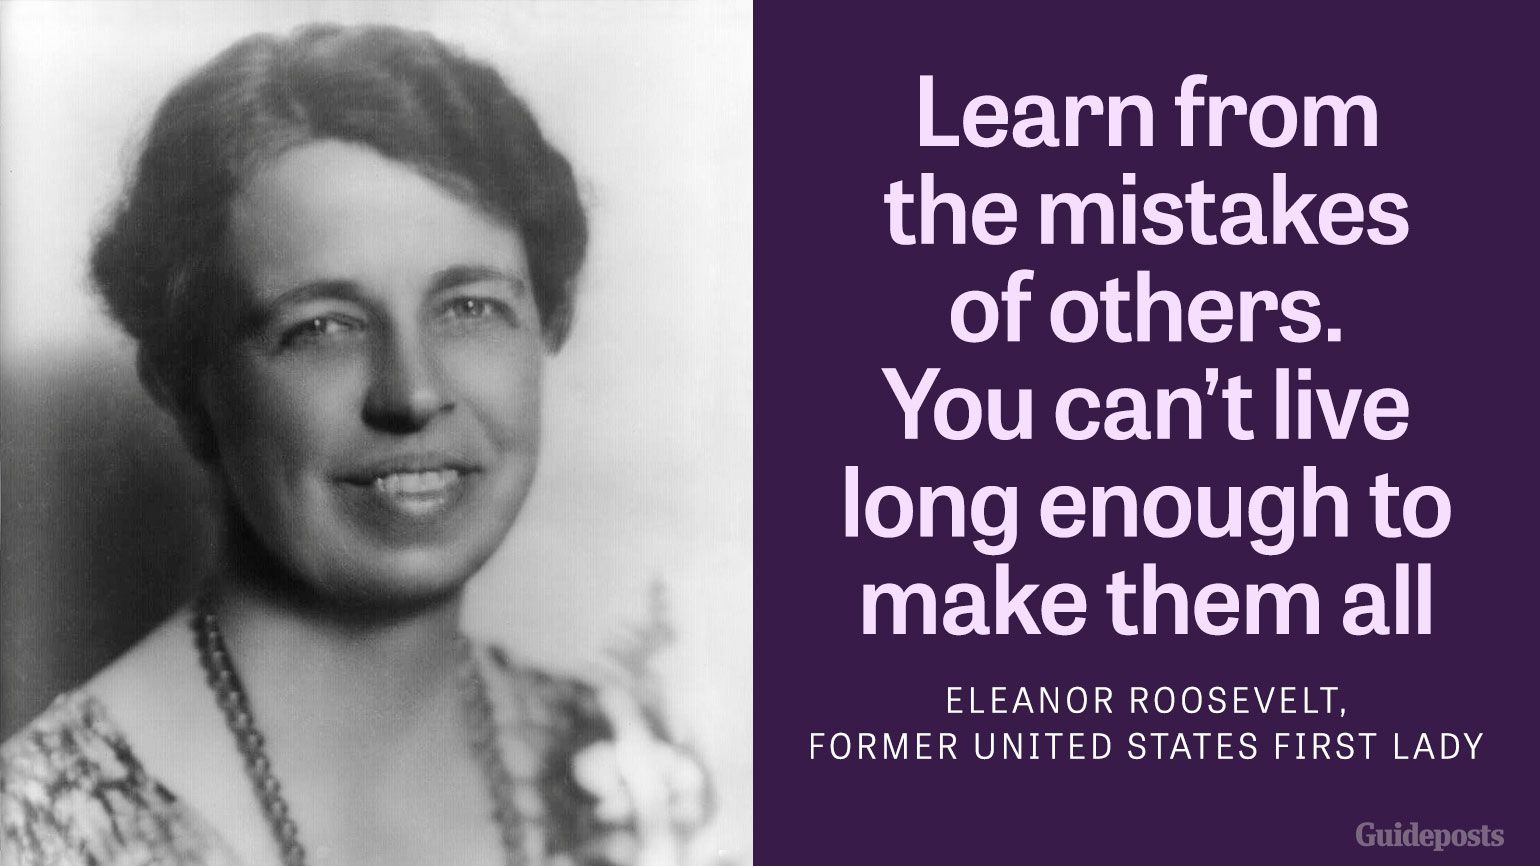 quotes from famous women in history